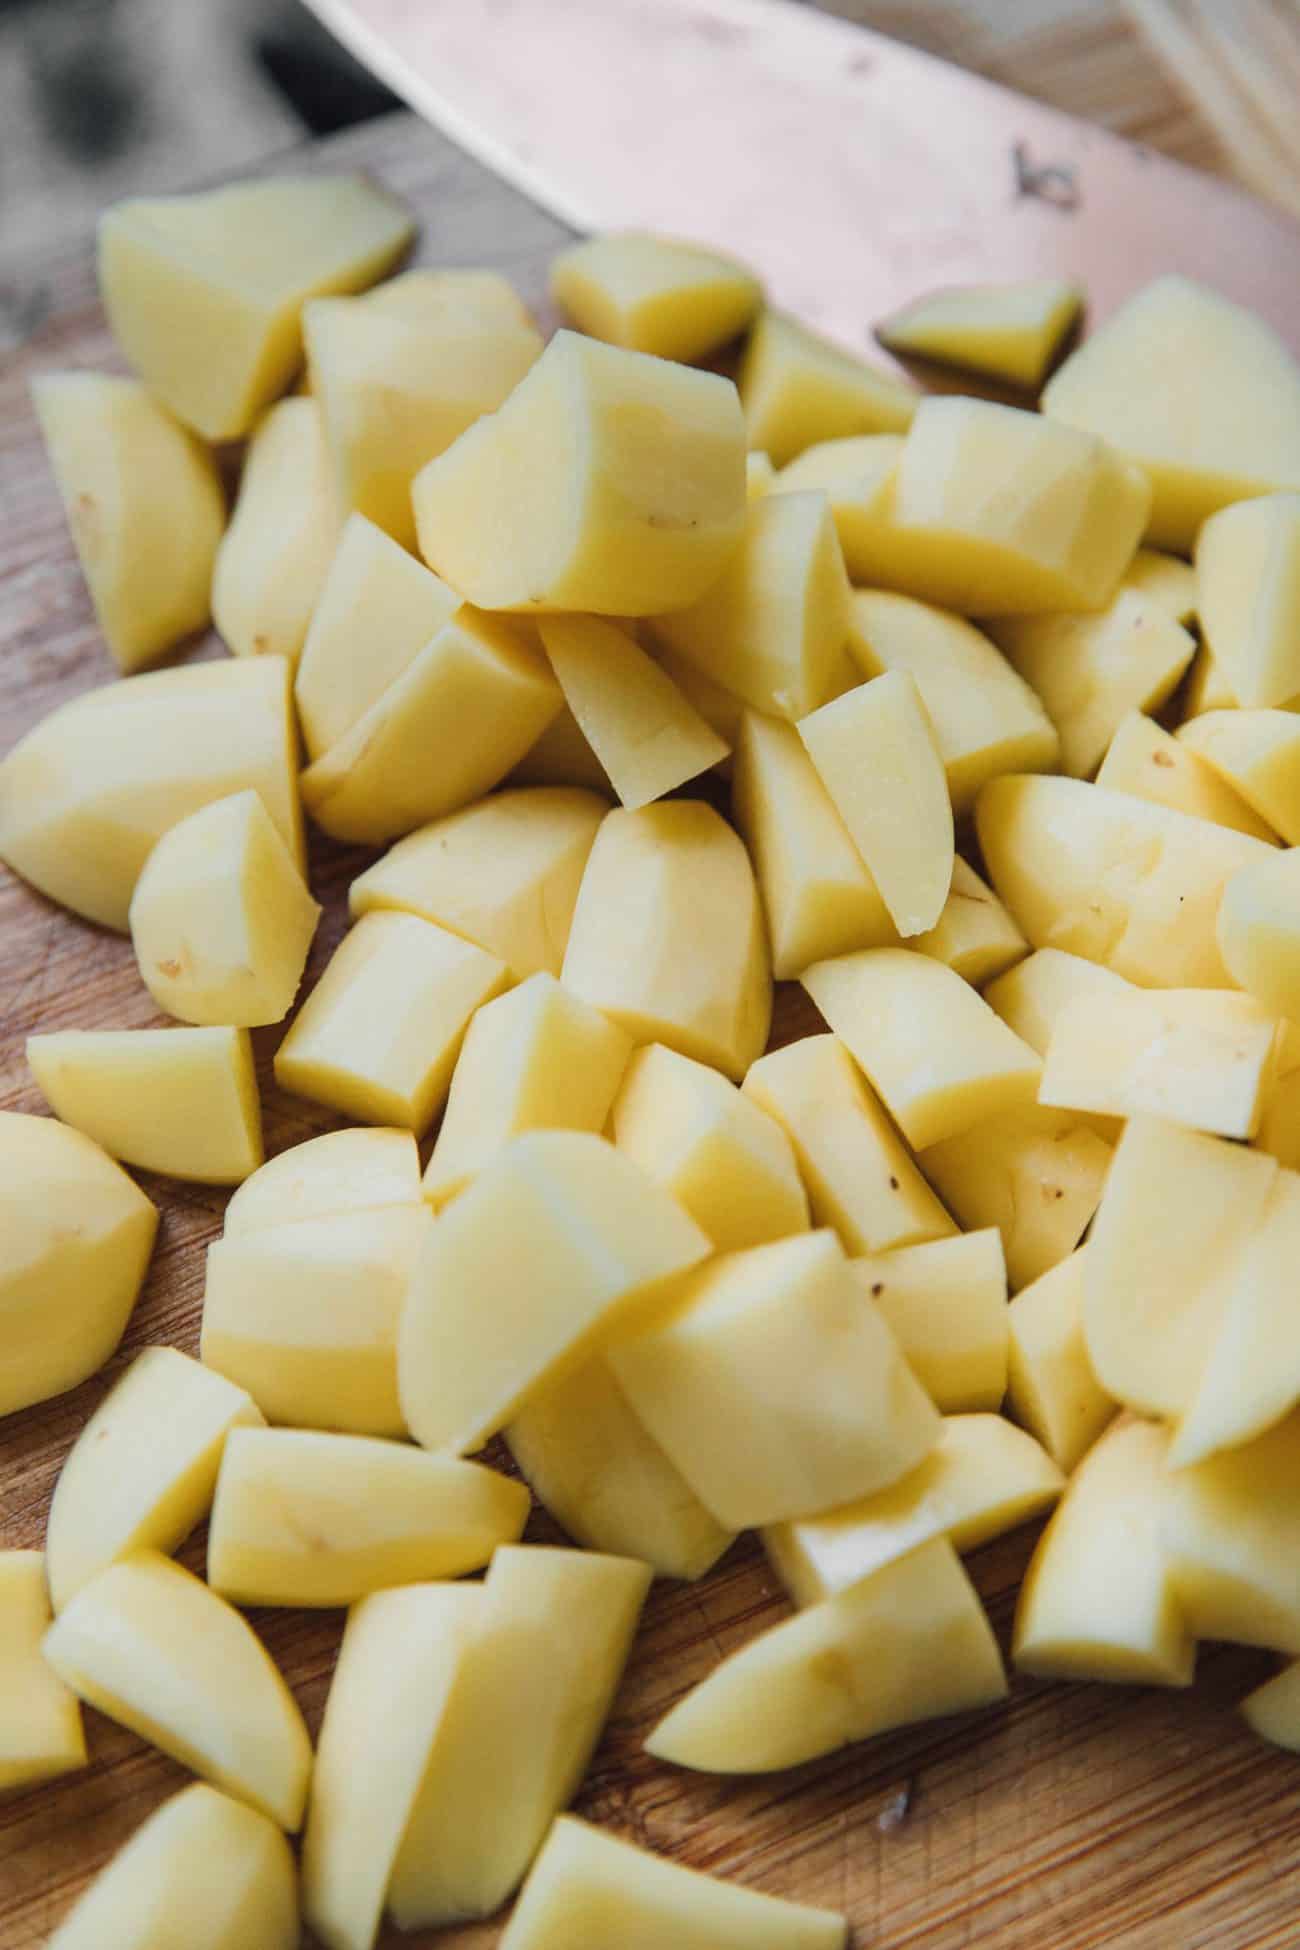 Slice your peeled potatoes into thin cuts.